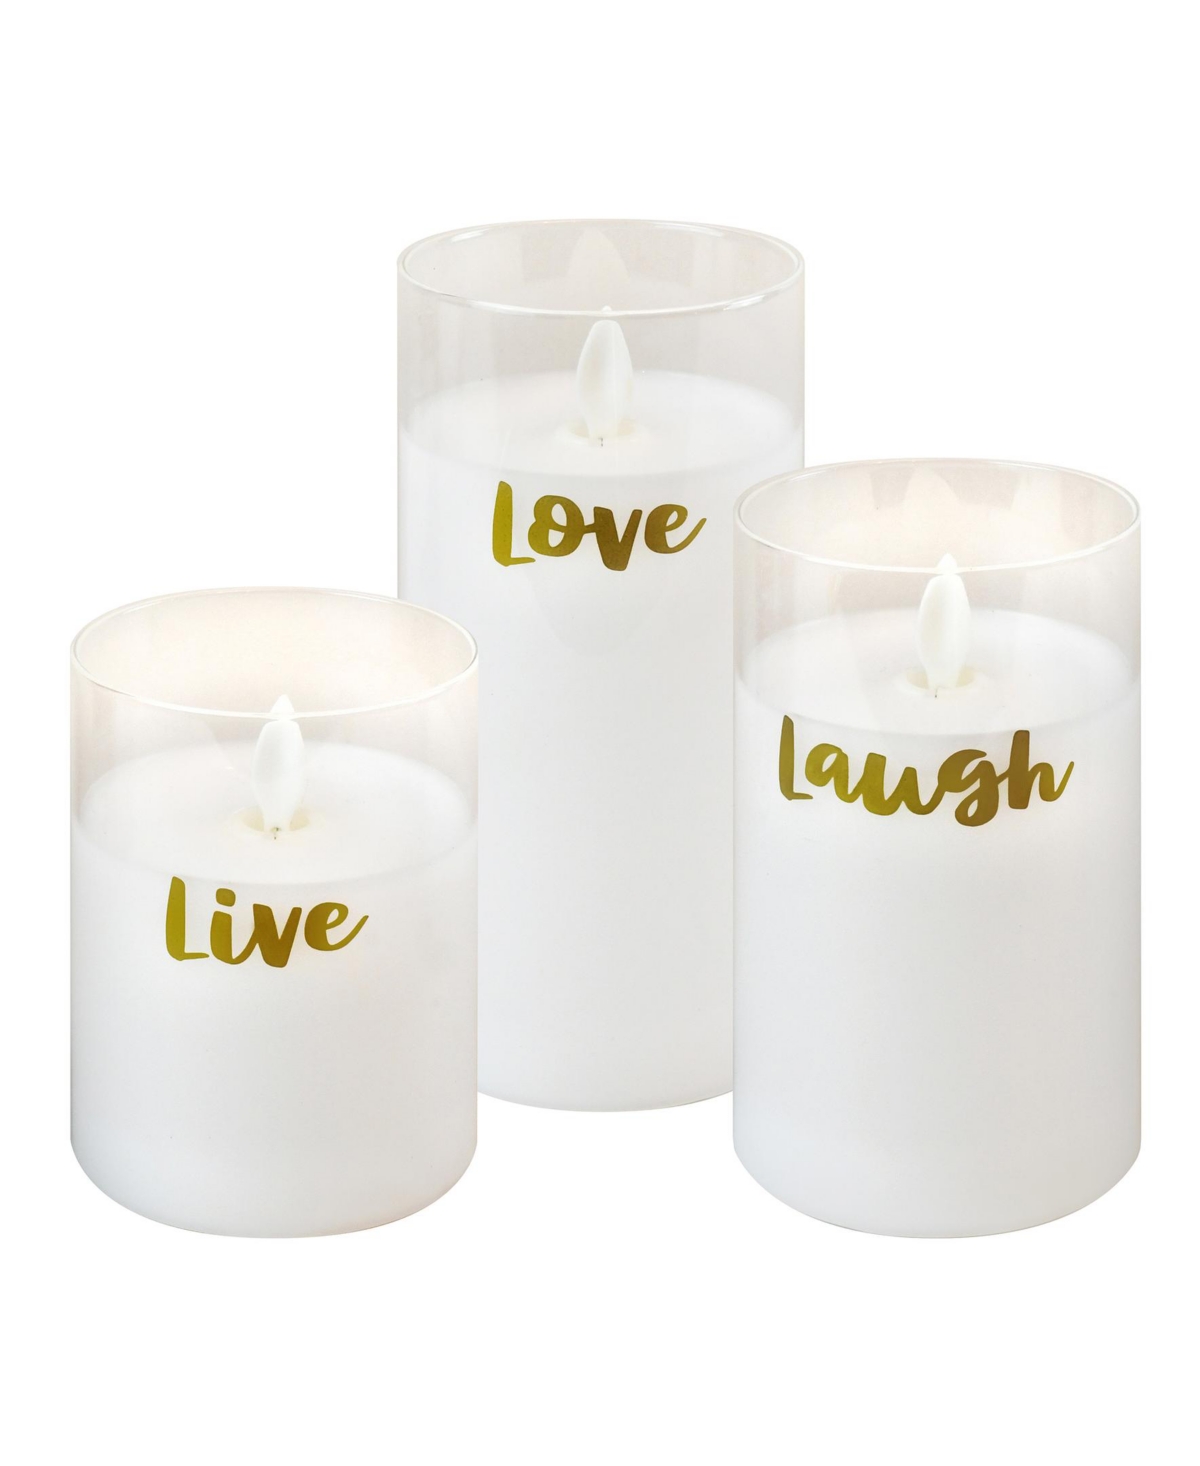 Moving Flame Live Laugh Love Led Glass Candles, Set of 3 - Gold-Tone